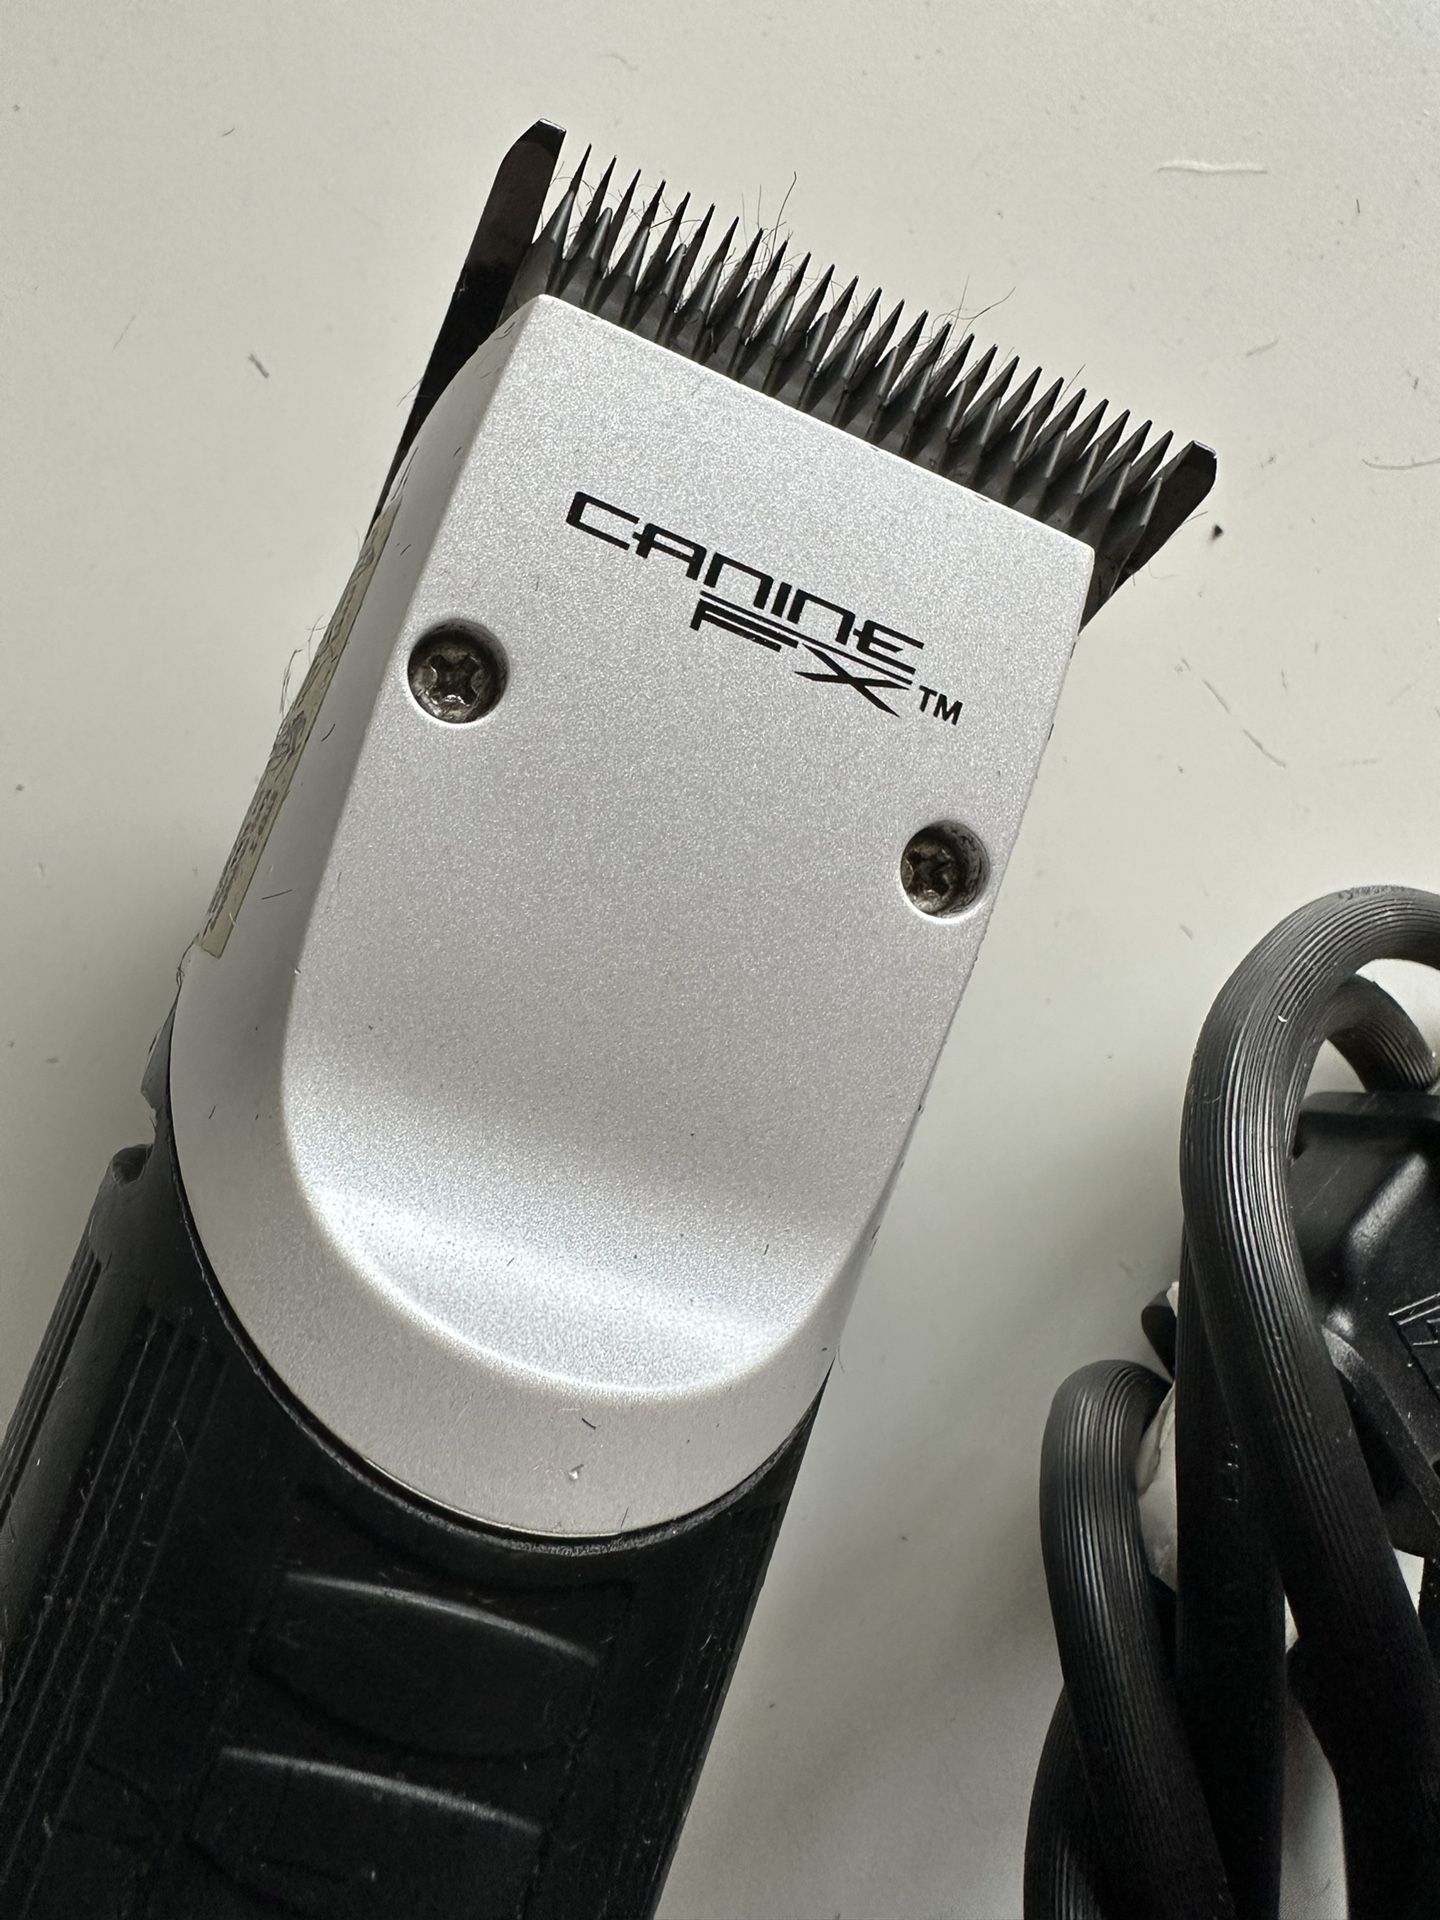 Conair Canine FX clippers